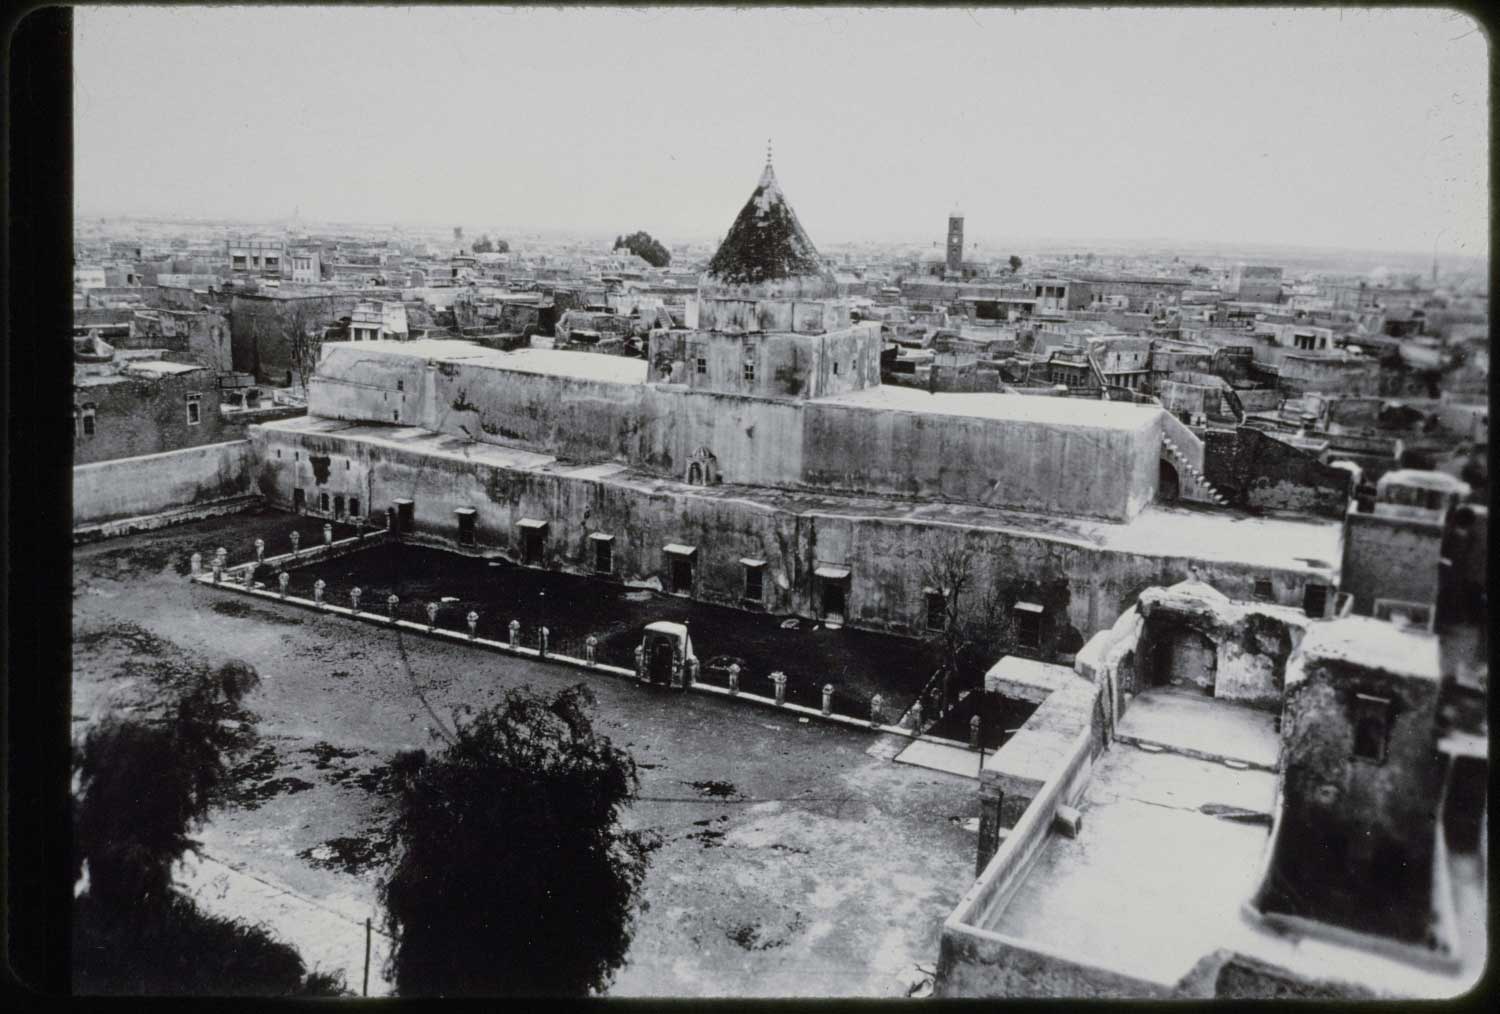 Exterior view of the prayer hall structure prior to 1940s reconstruction, taken from atop the minaret to the northwest of the mosque.